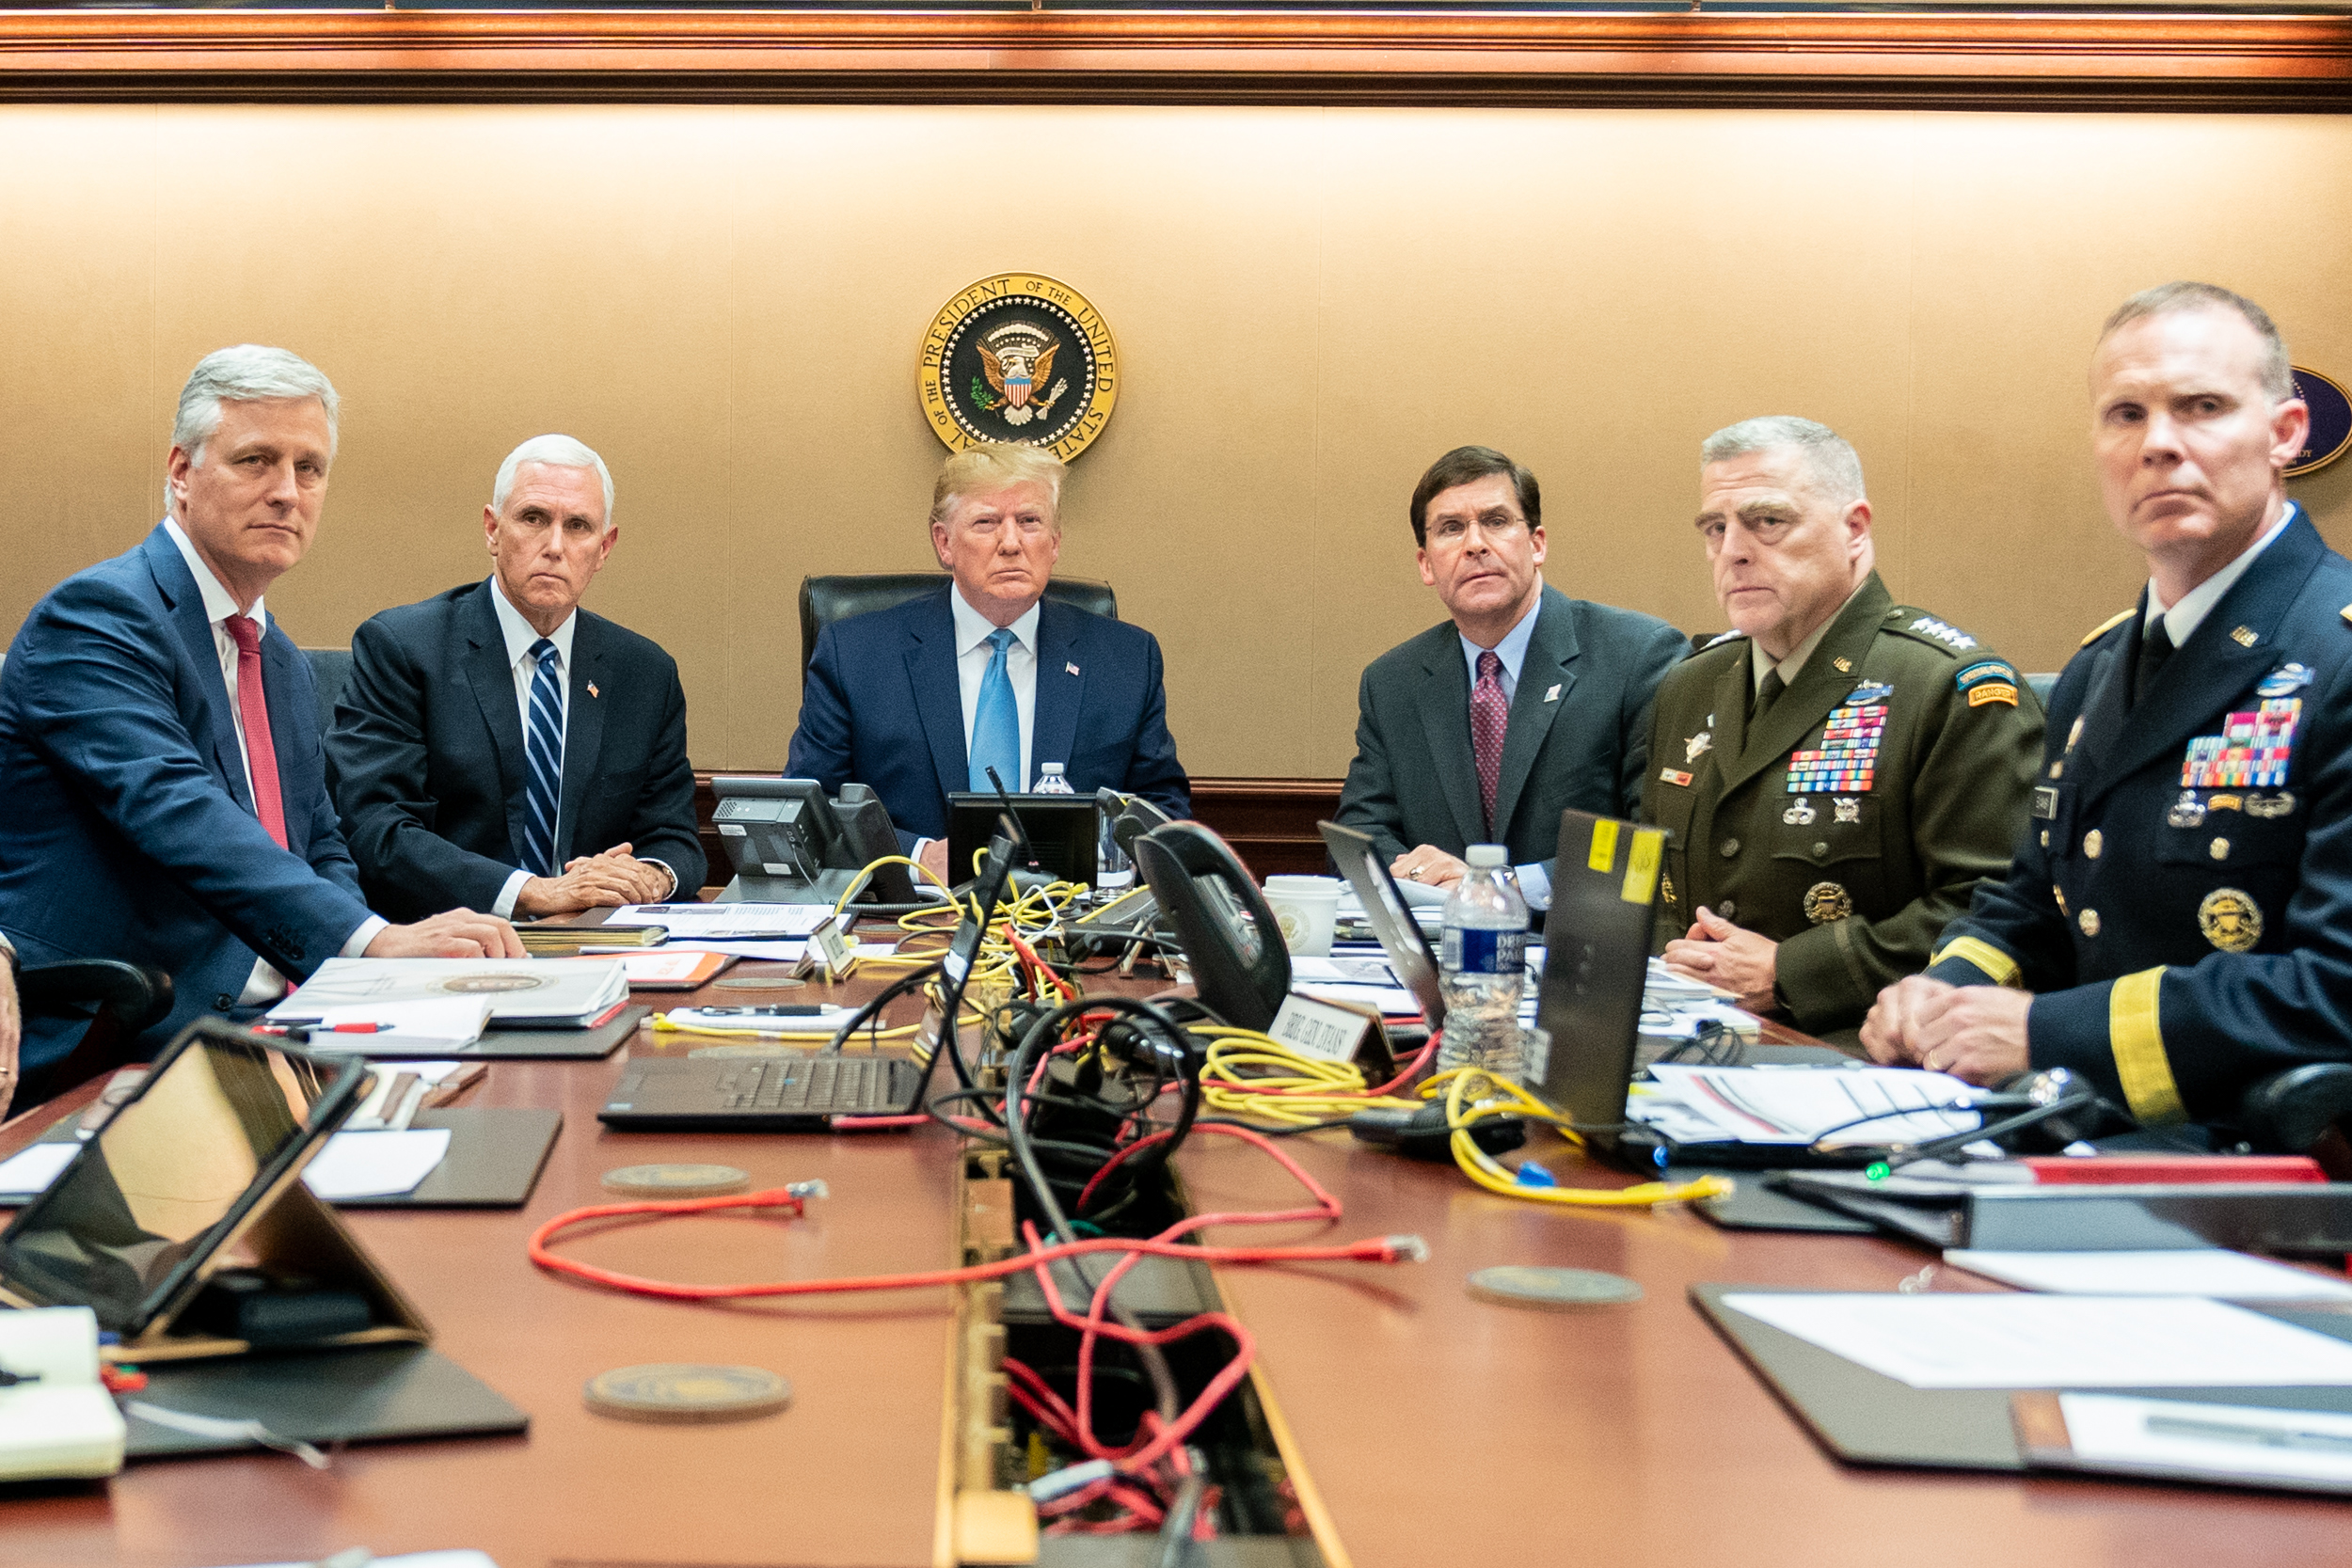 WASHINGTON, DC - OCTOBER 26: In this handout photo provided by the White House, President Donald J. Trump is joined by Vice President Mike Pence (2nd L), National Security Advisor Robert O’Brien (L), Secretary of Defense Mark Esper (3rd R), Chairman of the Joint Chiefs of Staff U.S. Army General Mark A. Milley (2nd R) and Brig. Gen. Marcus Evans, Deputy Director for Special Operations on the Joint Staff in the Situation Room of the White House October 26, 2019 in Washington, DC. The President was monitoring developments as U.S. Special Operations forces close in on ISIS leader Abu Bakr al-Baghdadi’s compound in Syria with a mission to kill or capture the terrorist.